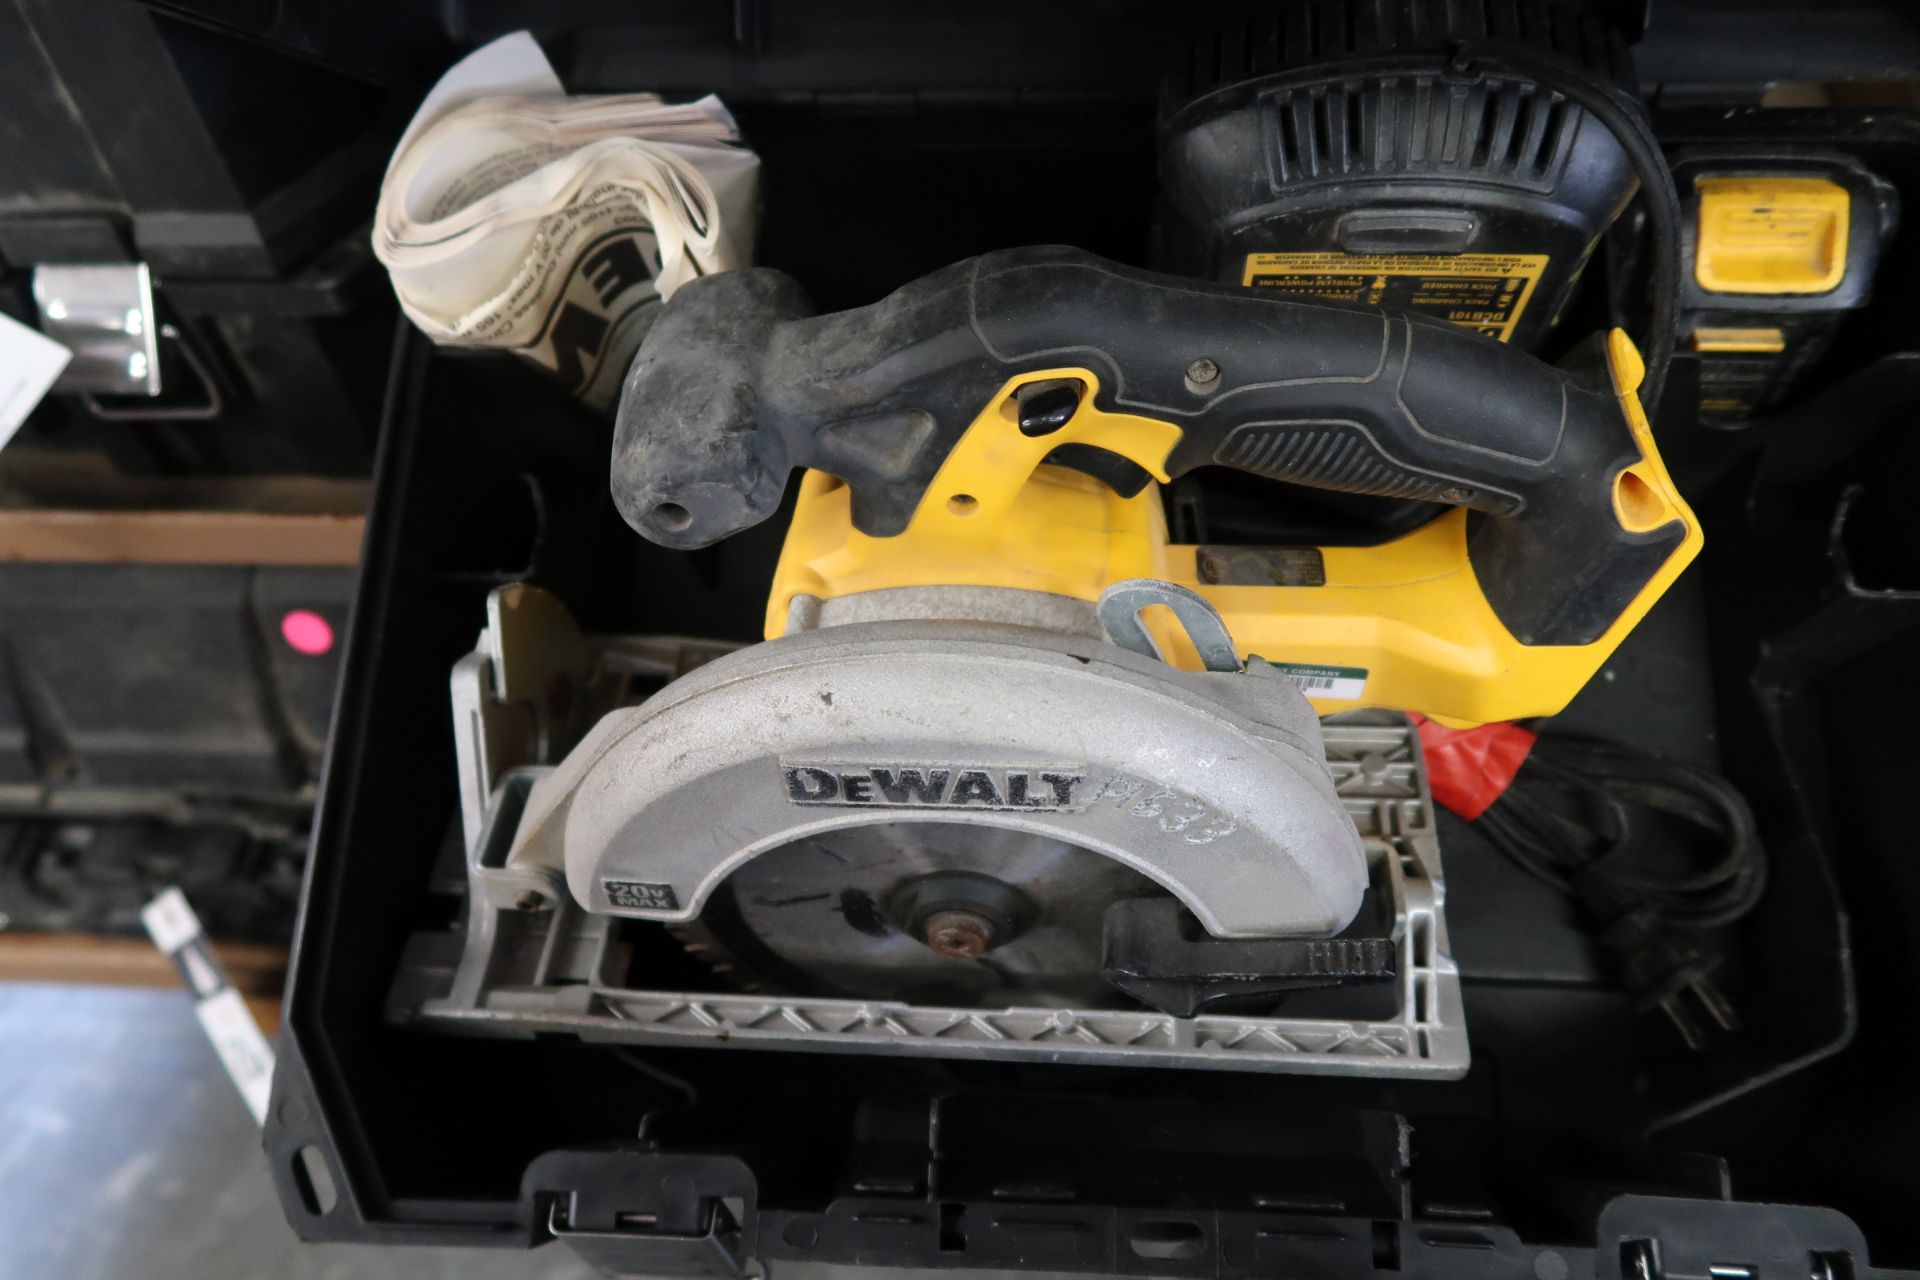 DeWalt 20Volt Cordless Circular Saws and Portable Band Saws (4) w/ Chargers - NO BATTERIES) (SOLD - Image 3 of 6